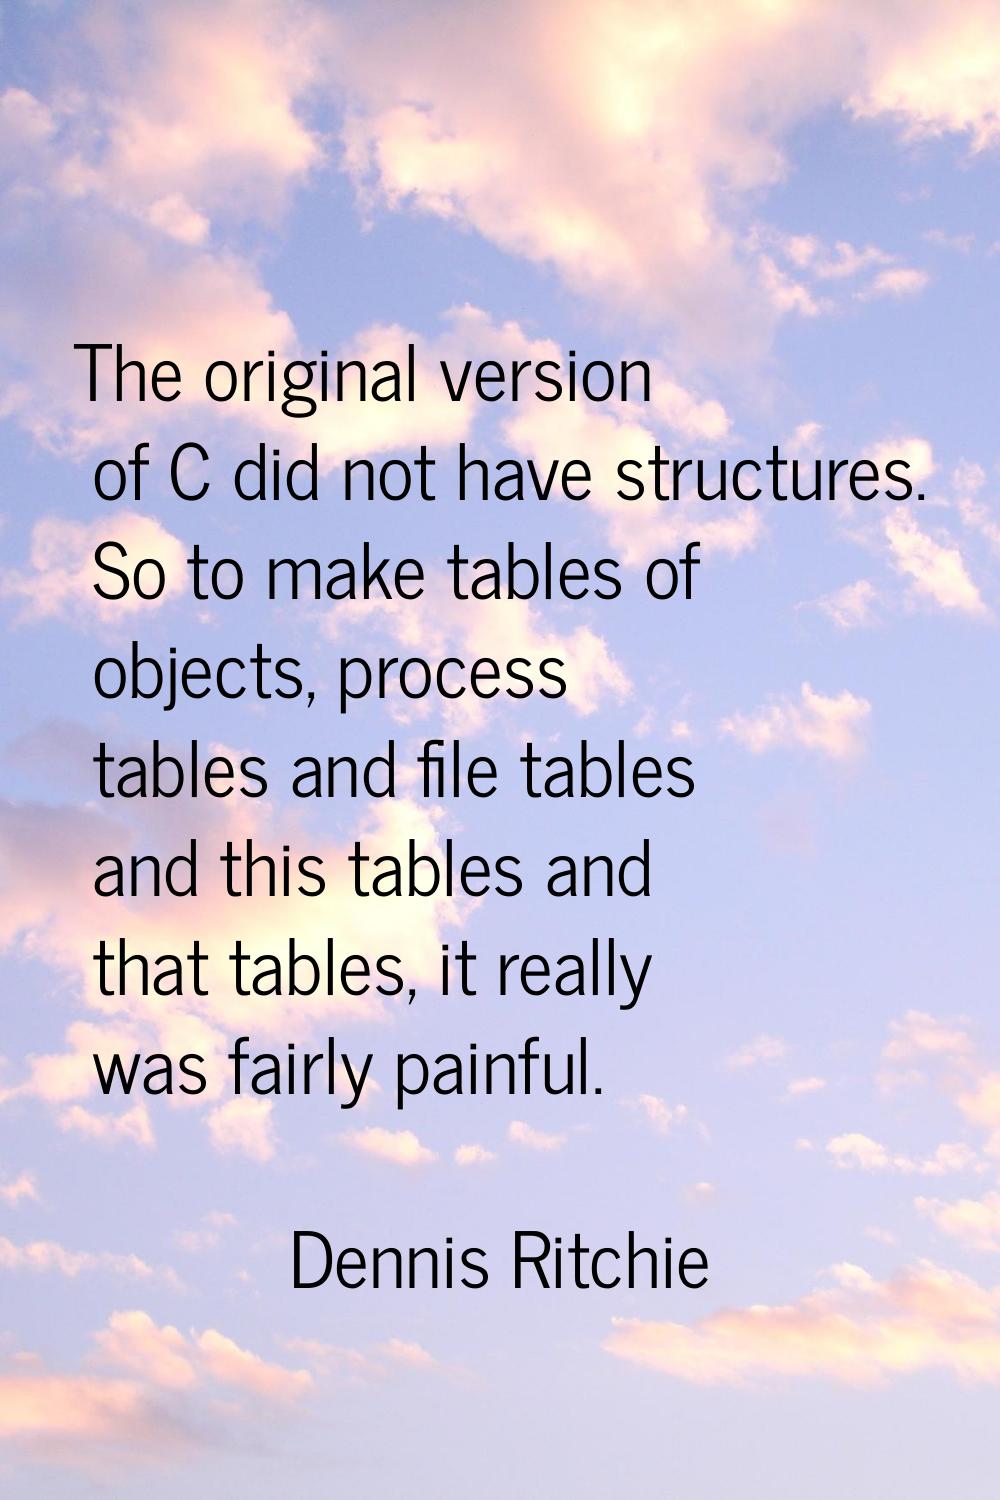 The original version of C did not have structures. So to make tables of objects, process tables and